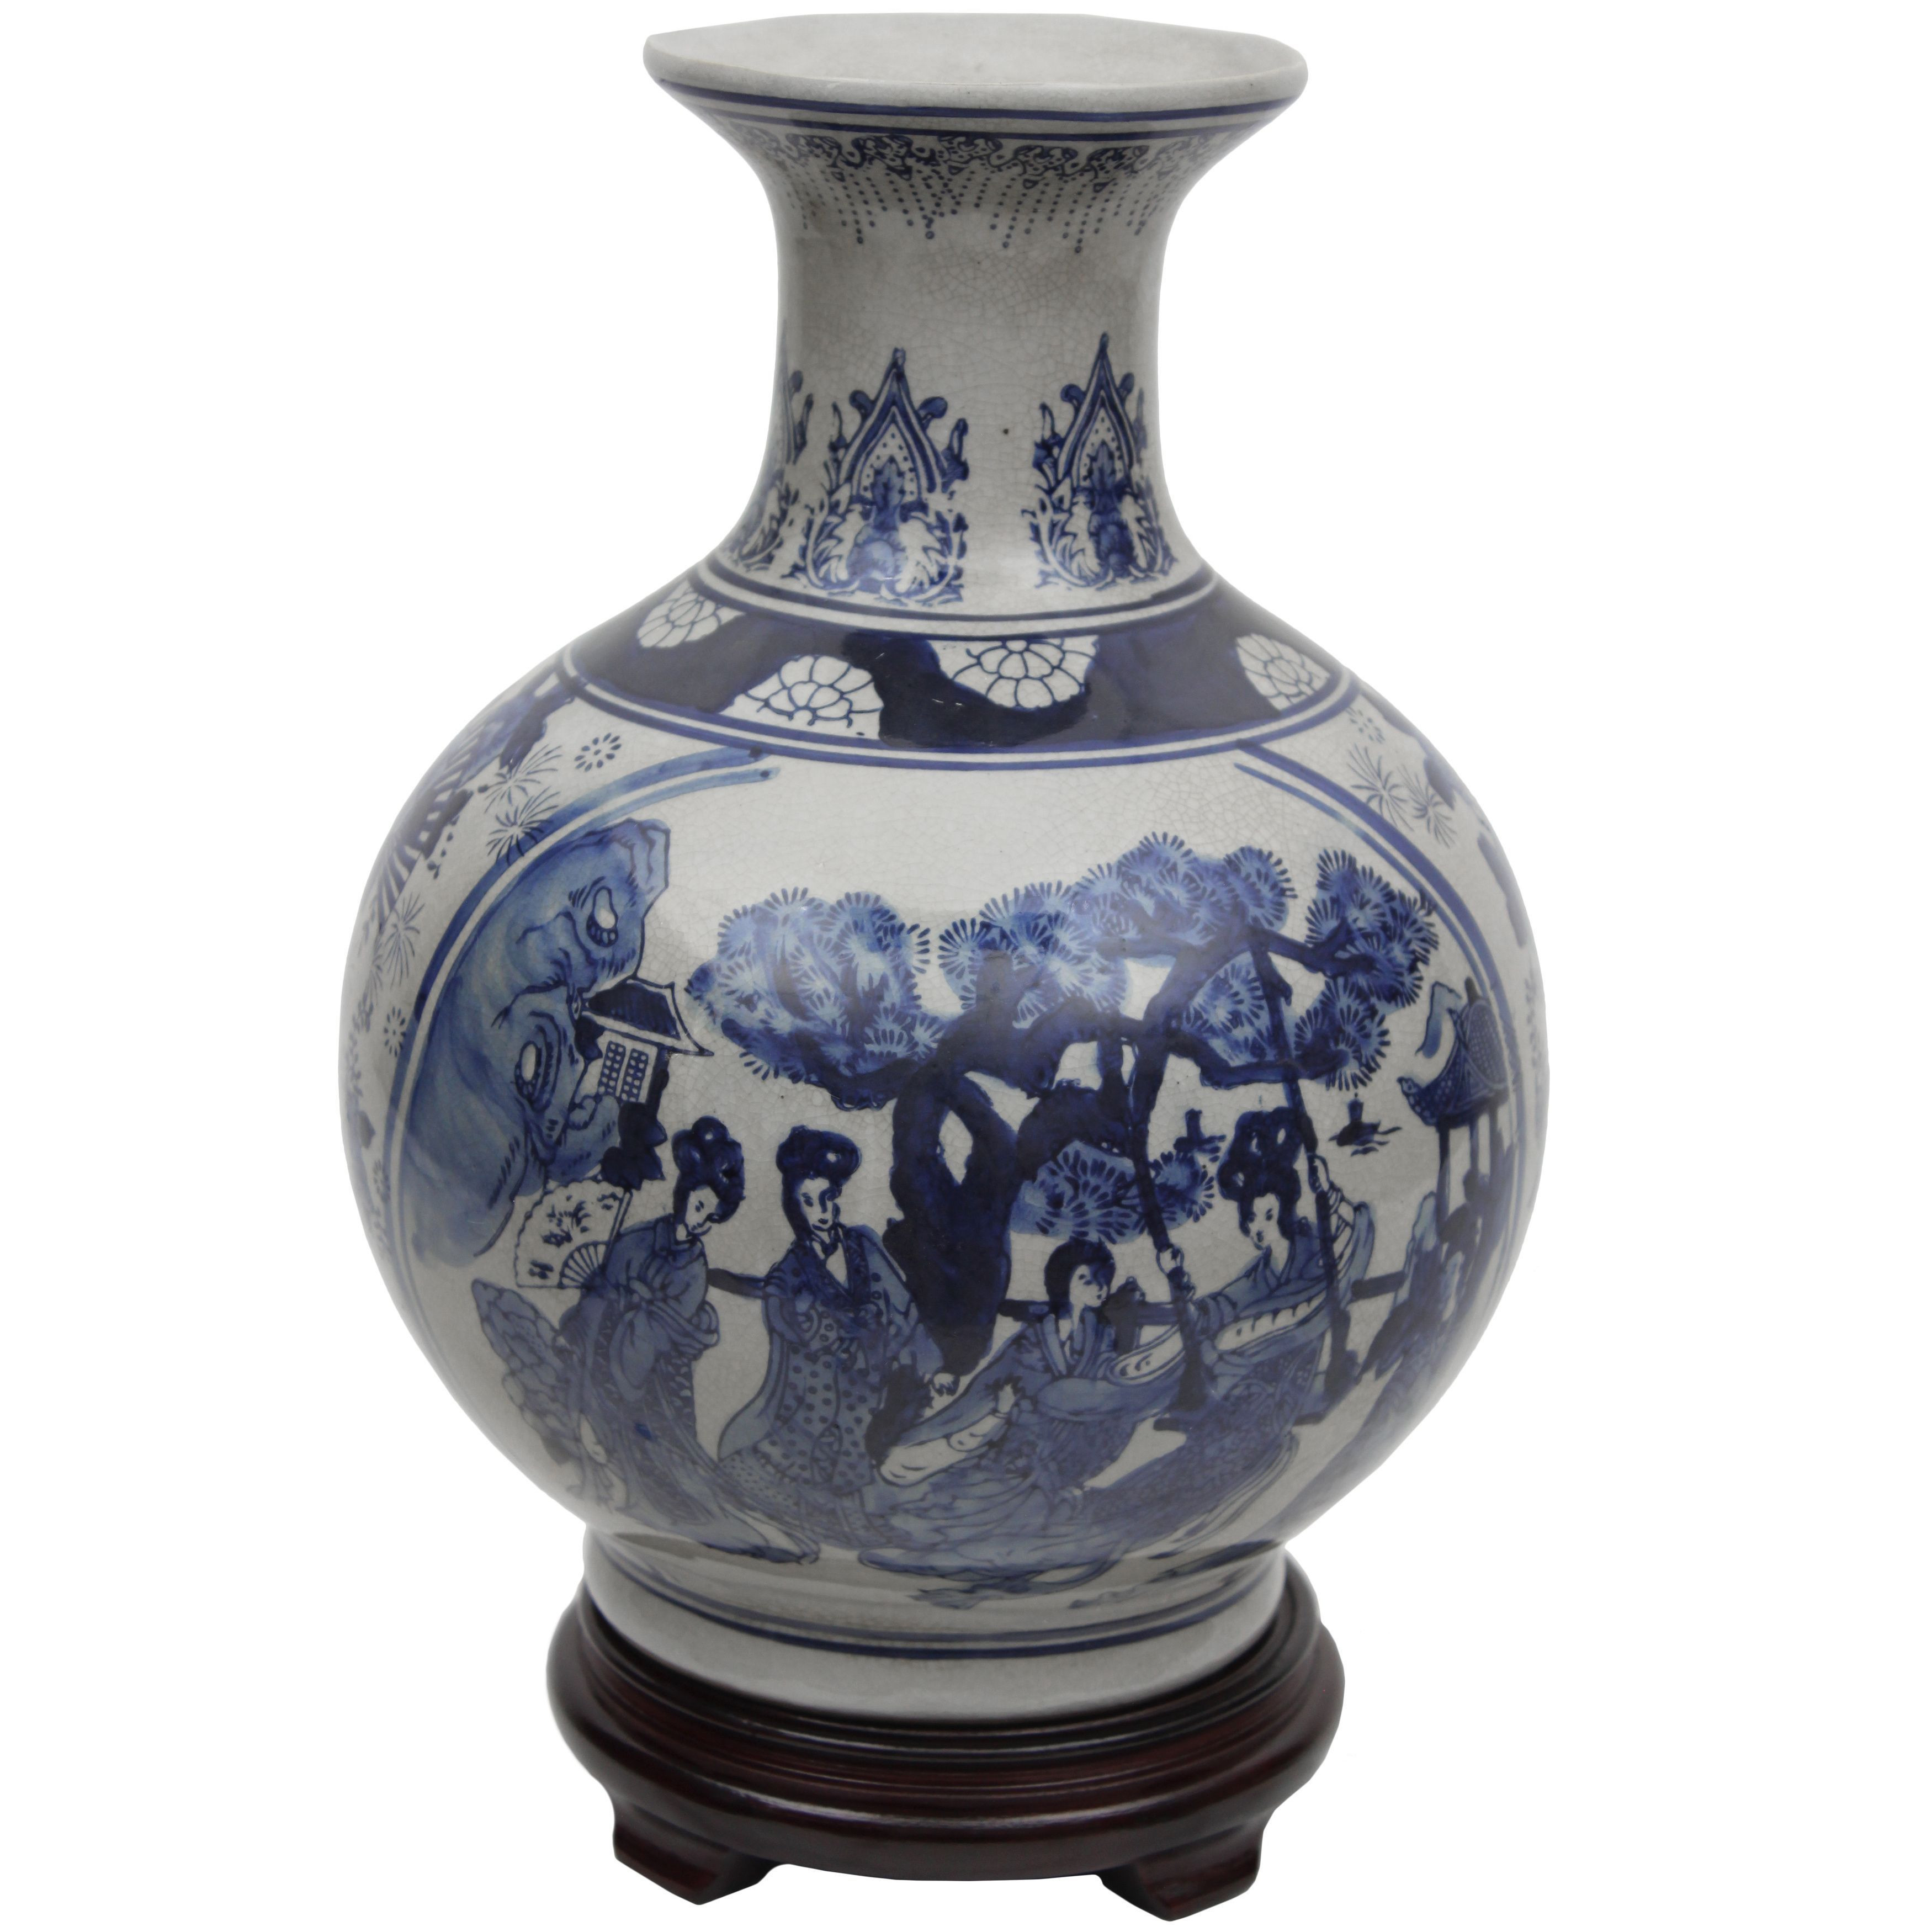 13 Awesome Chinese Pottery Vase 2023 free download chinese pottery vase of photos of white pottery vase vases artificial plants collection within handmade 14 inch blue and white porcelain vase china size medium